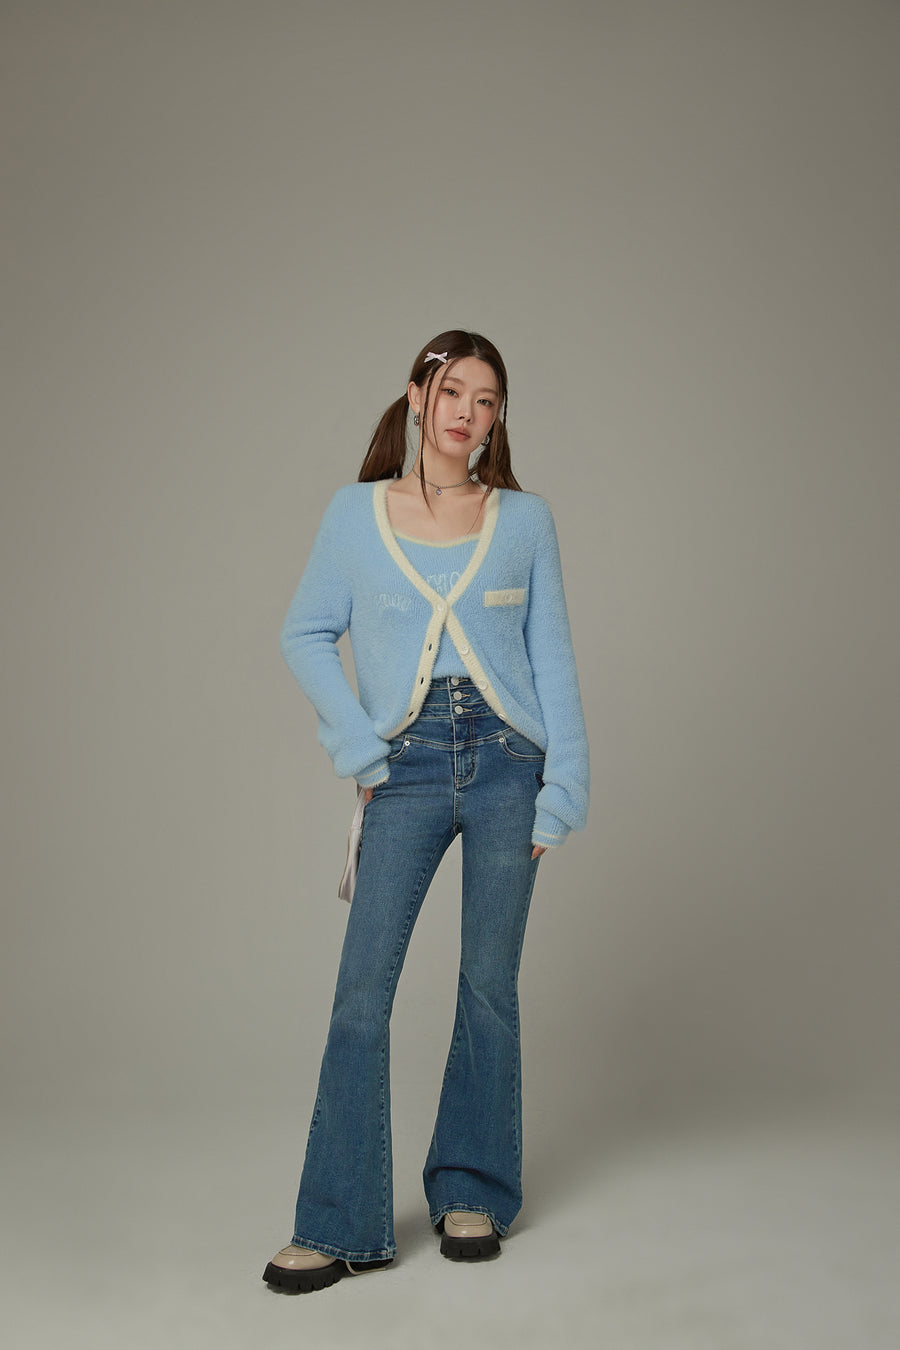 CHUU Heart Embroidered Bootcut Denim Jeans